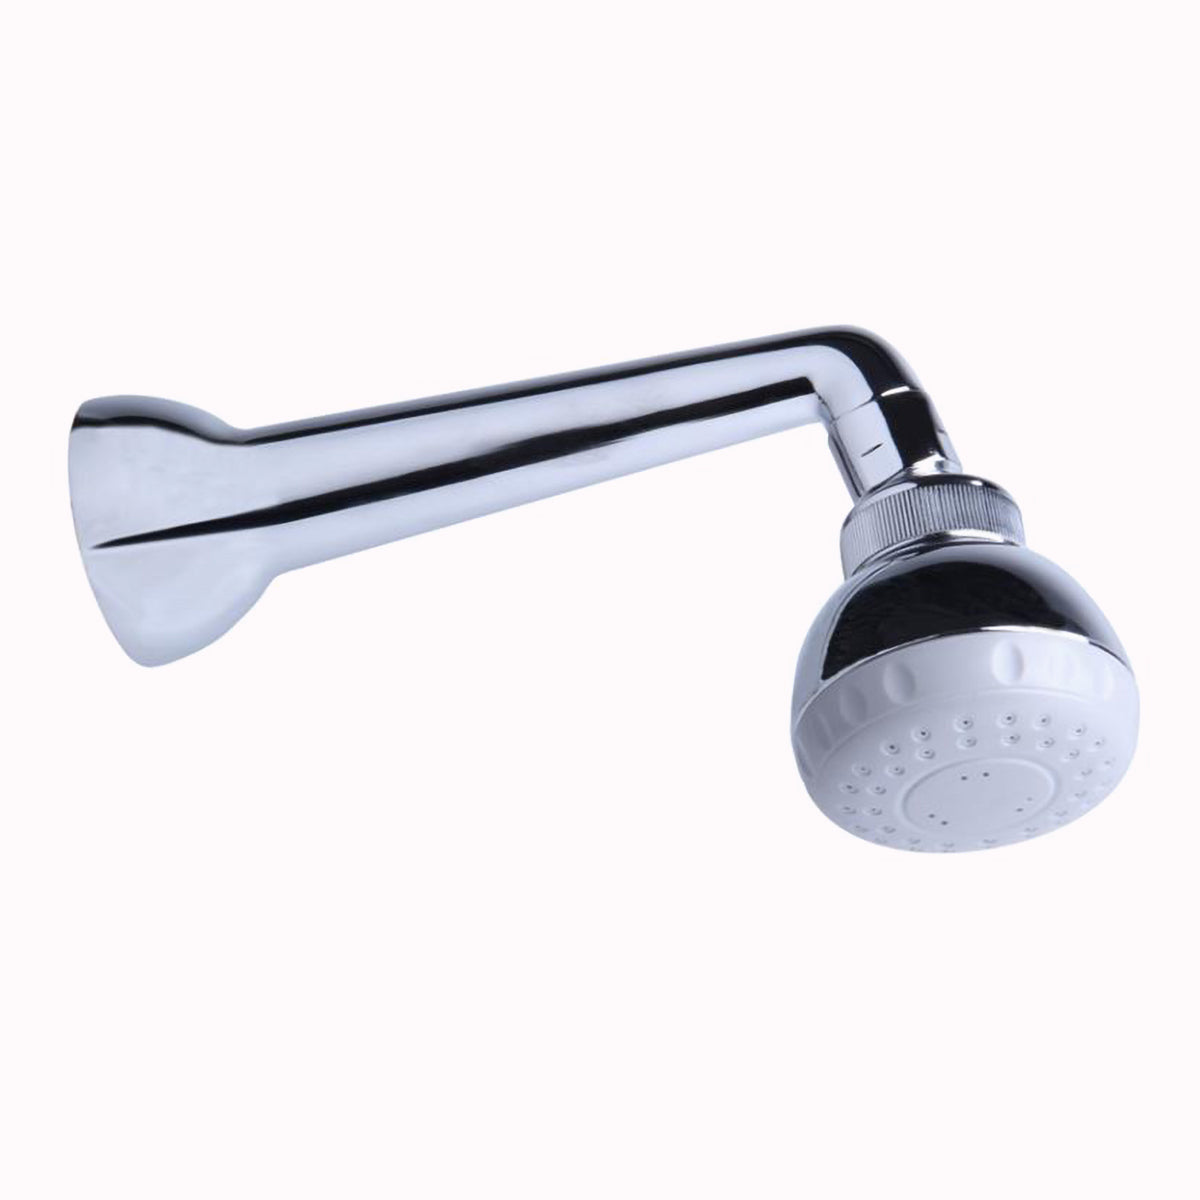 Round Jet Shower Head And Wall Arm Chrome